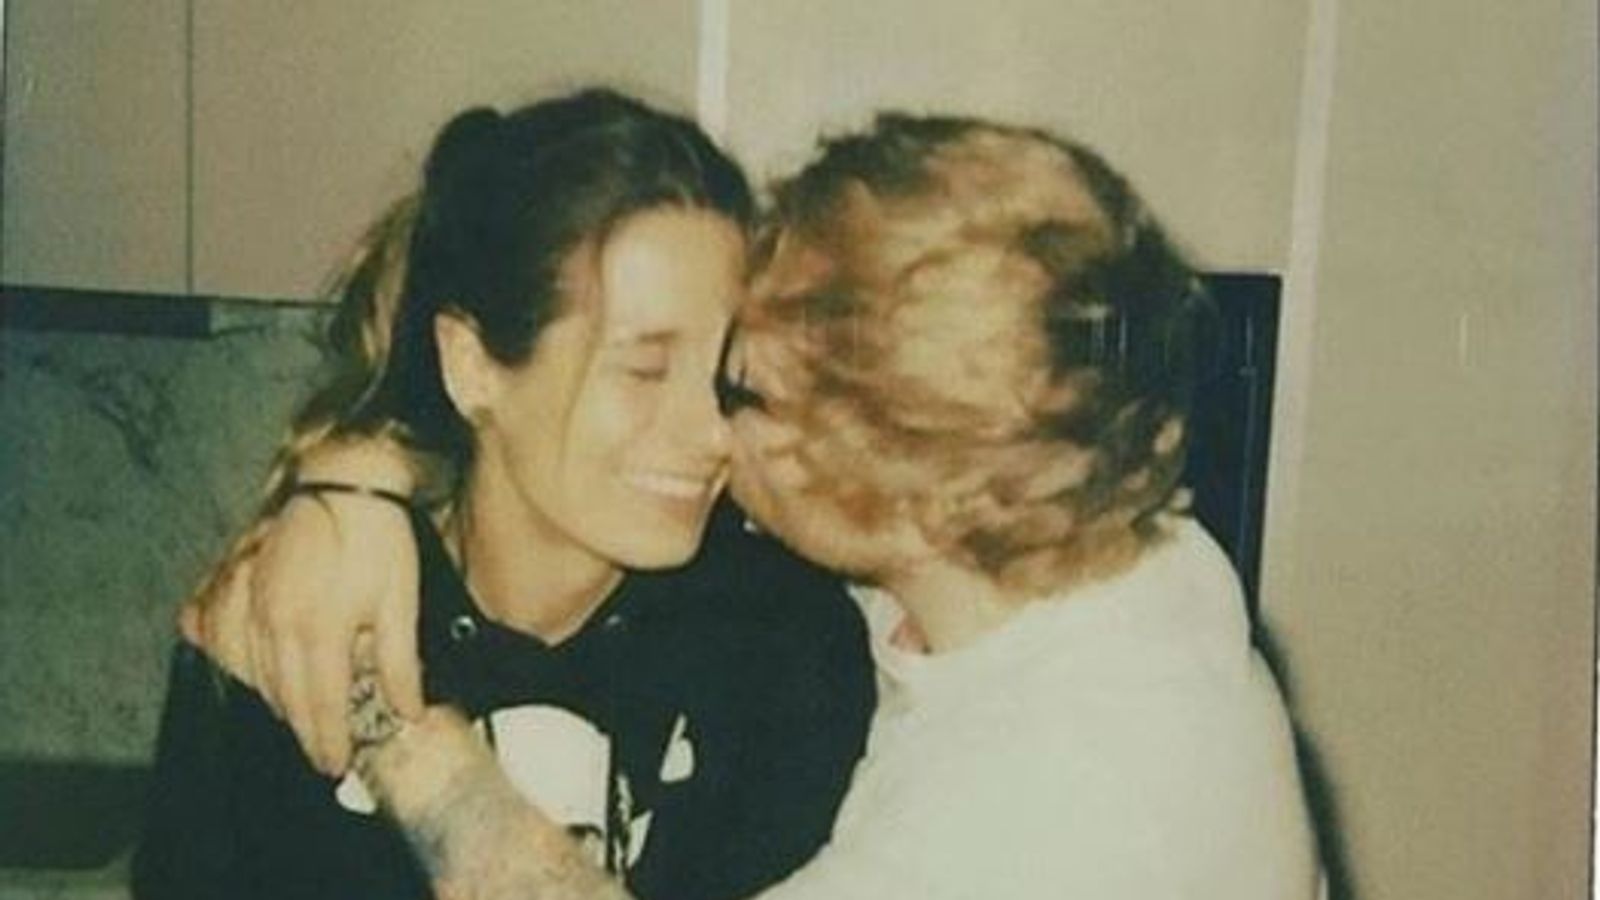 Sheeran how did ed have? girlfriends many Who Has